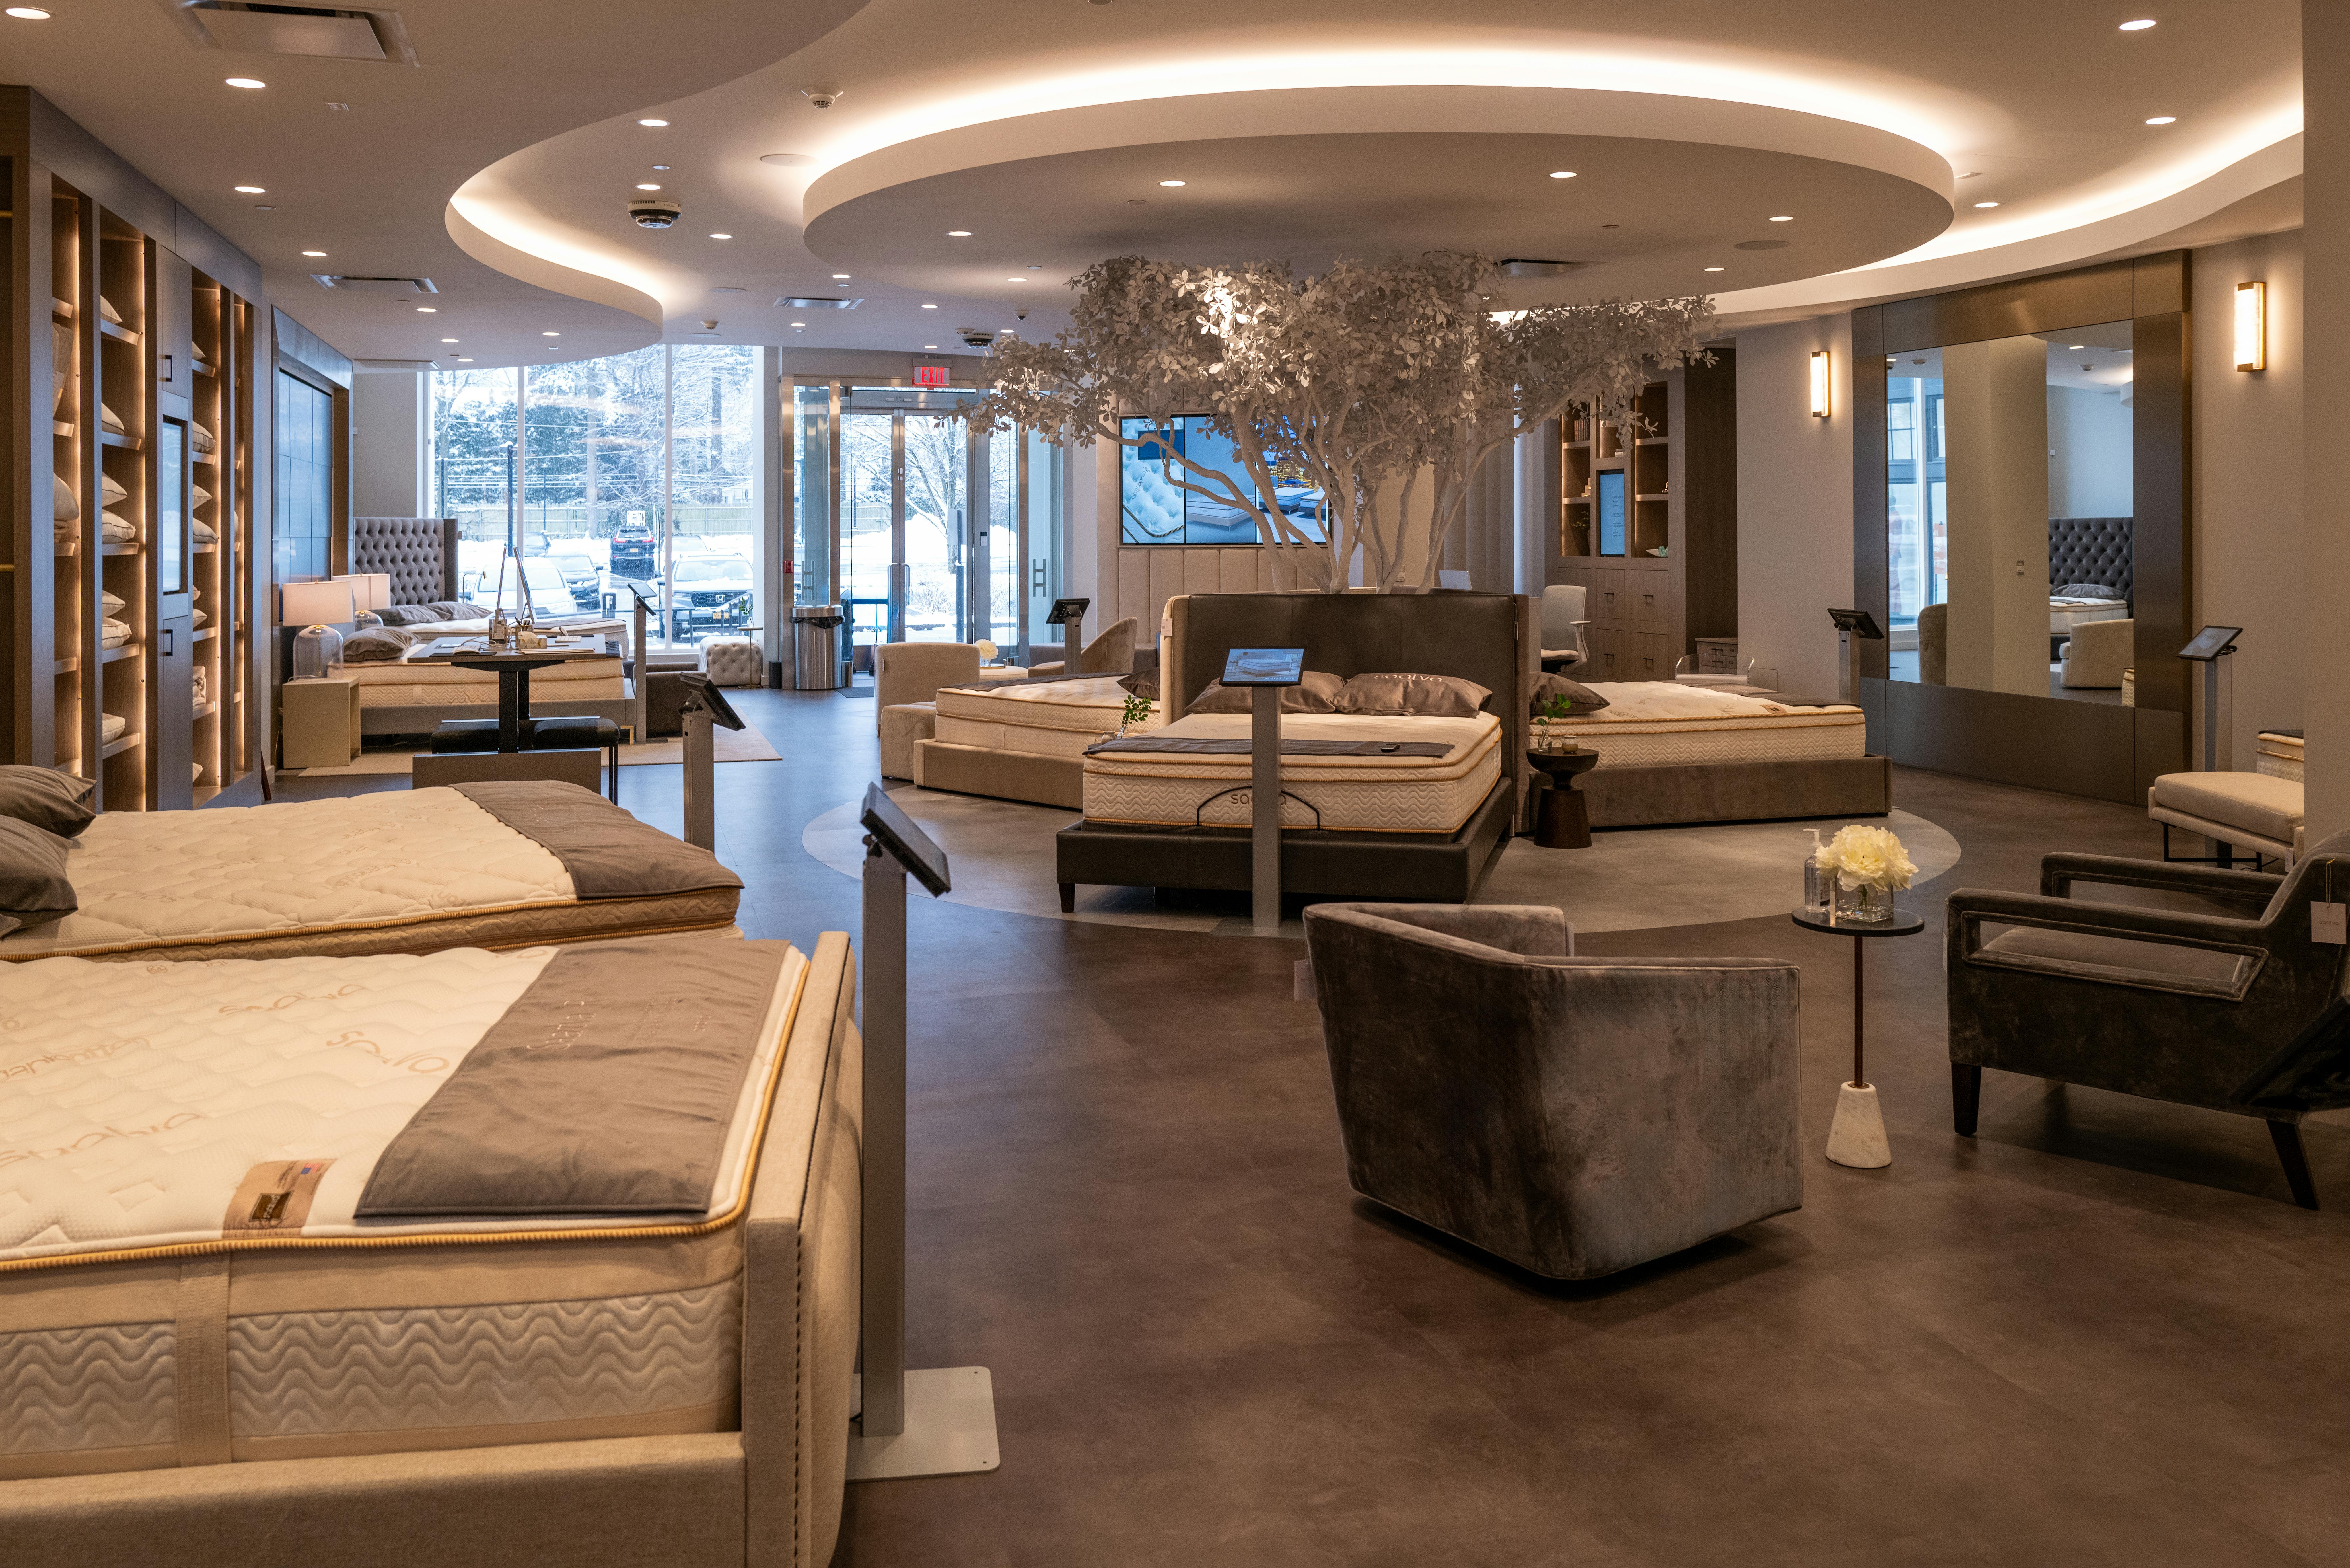 The cozy mattress testing areas inside the new Saatva Manhasset Viewing Room on Long Island.